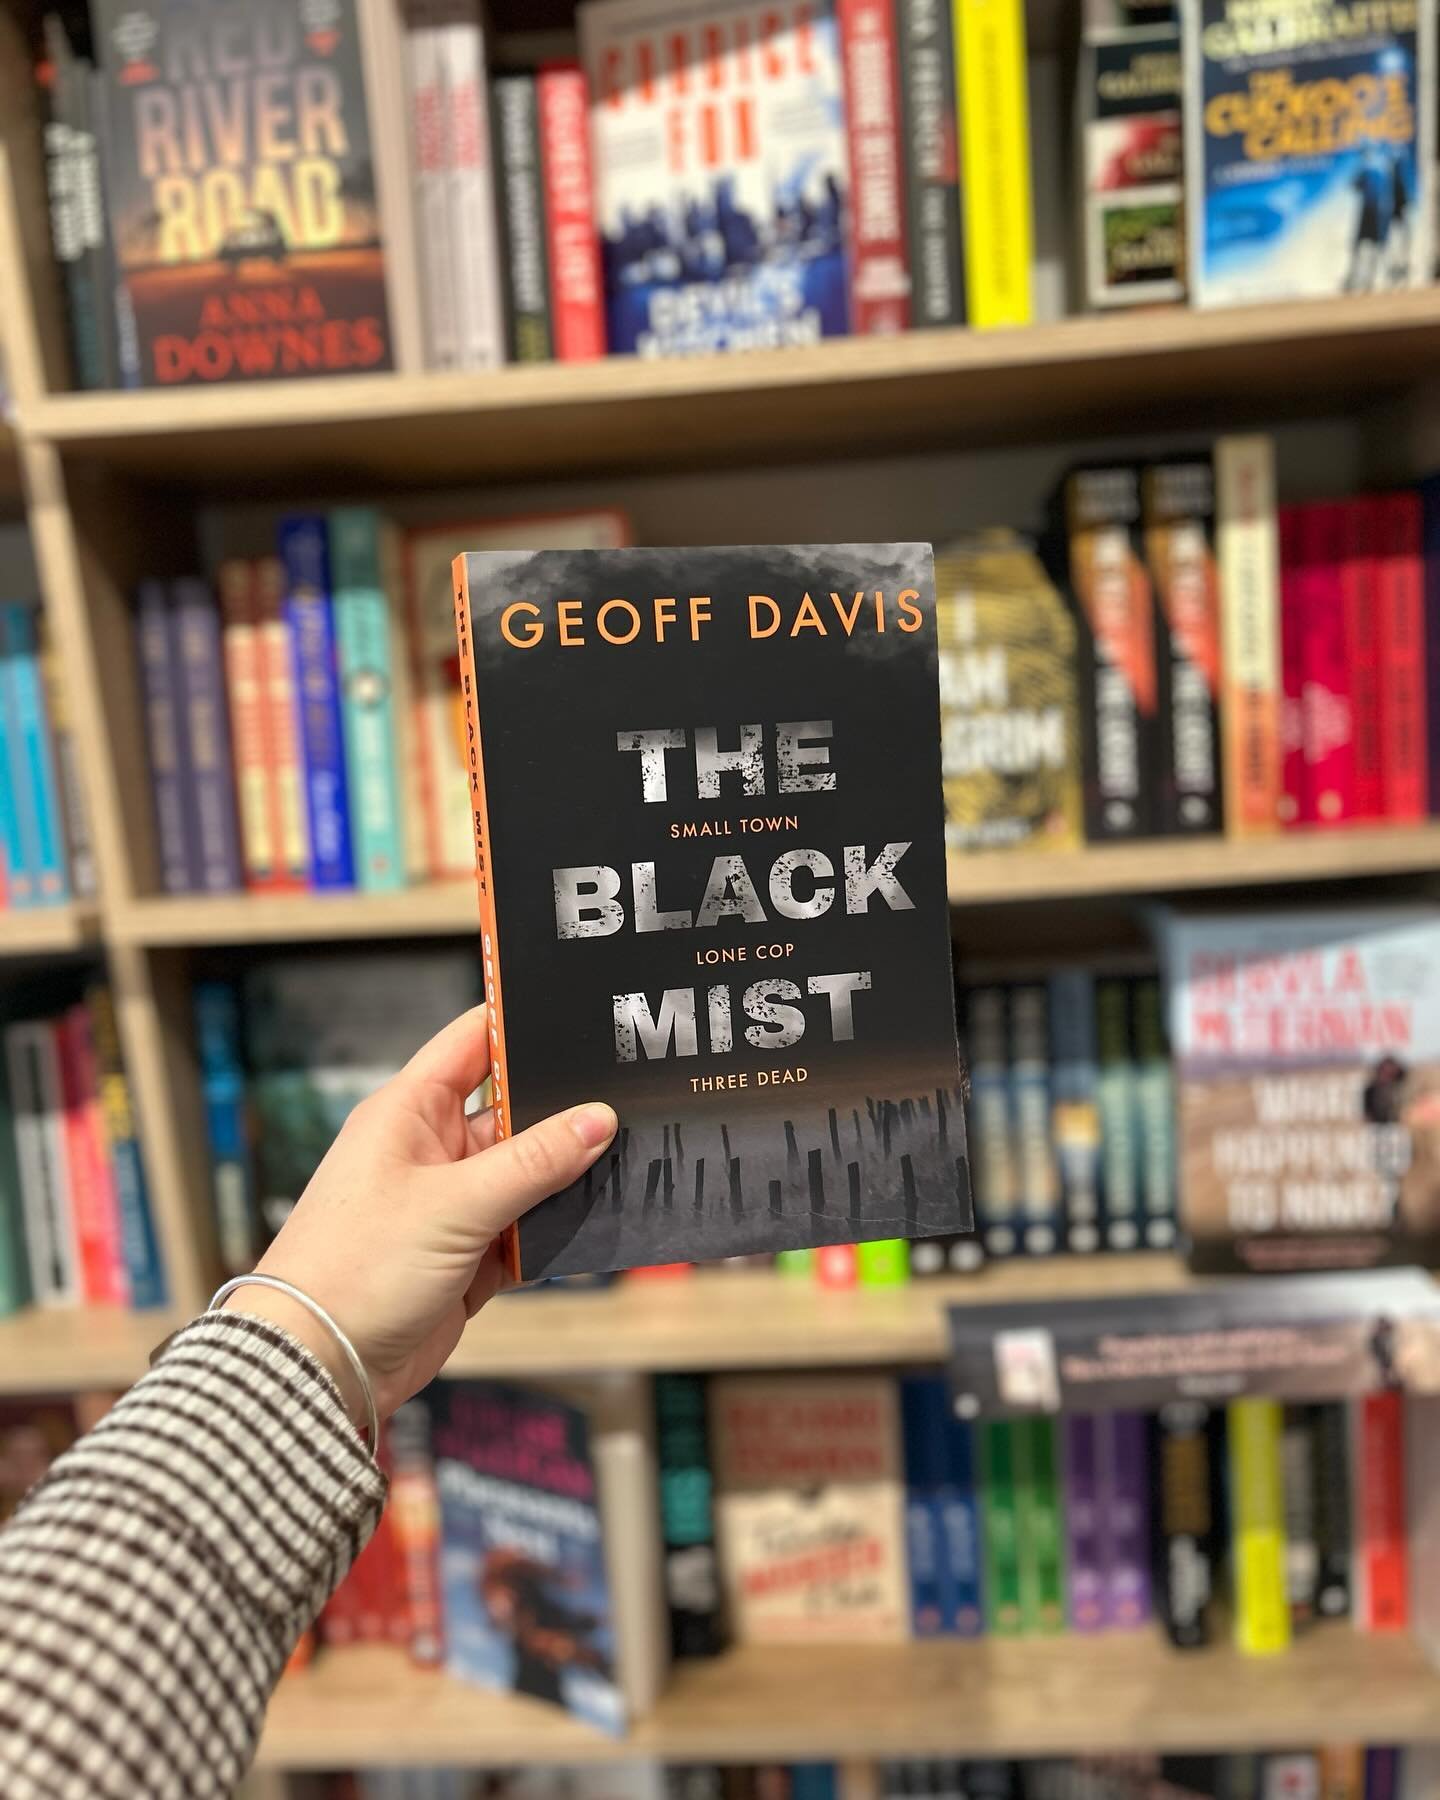 We&rsquo;re thrilled to stock The Black Mist by local author (and much loved customer) Geoff Davis 📖😱🚔

A wild ride through Australia&rsquo;s remote high-country, The Black Mist is a gripping cop thriller full of quirky small-town characters, dark